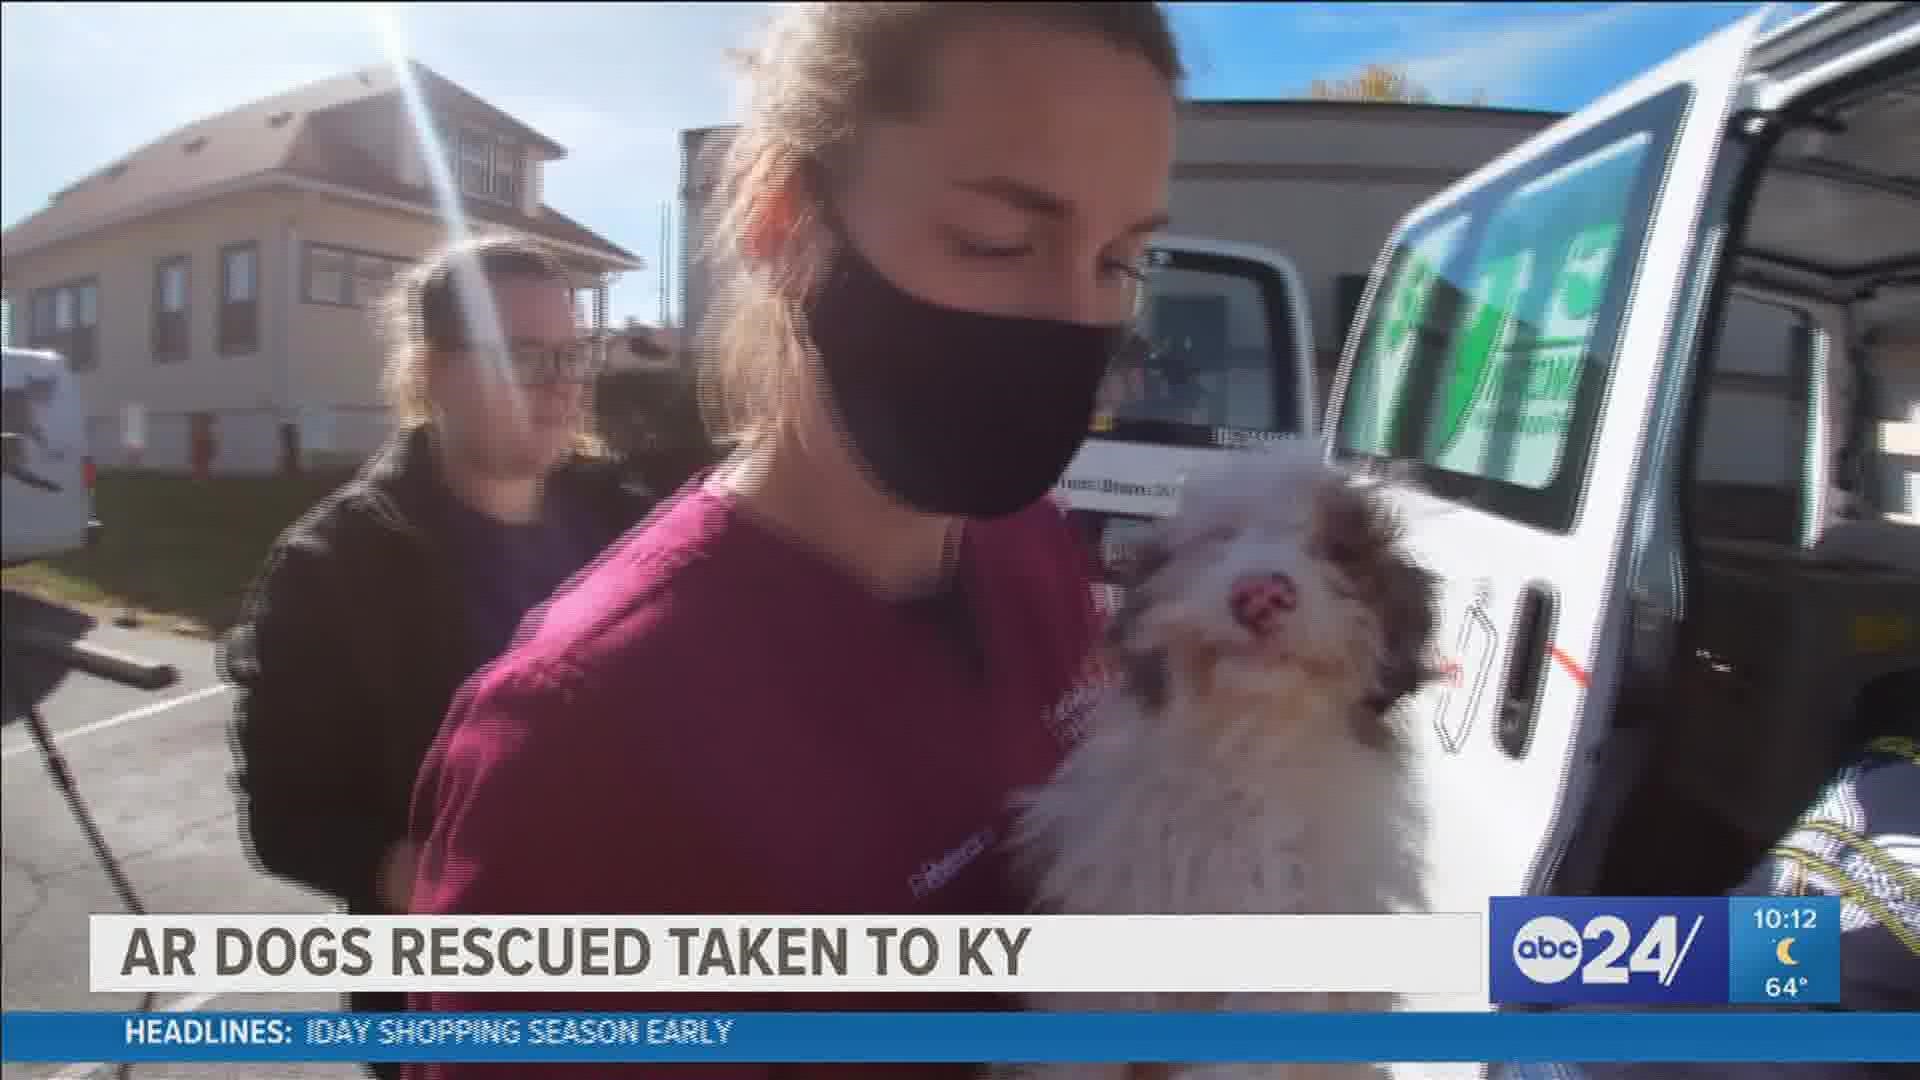 Dogs from the Humane Society of the Delta were transported to a humane shelter in Kentucky for care and treatment.